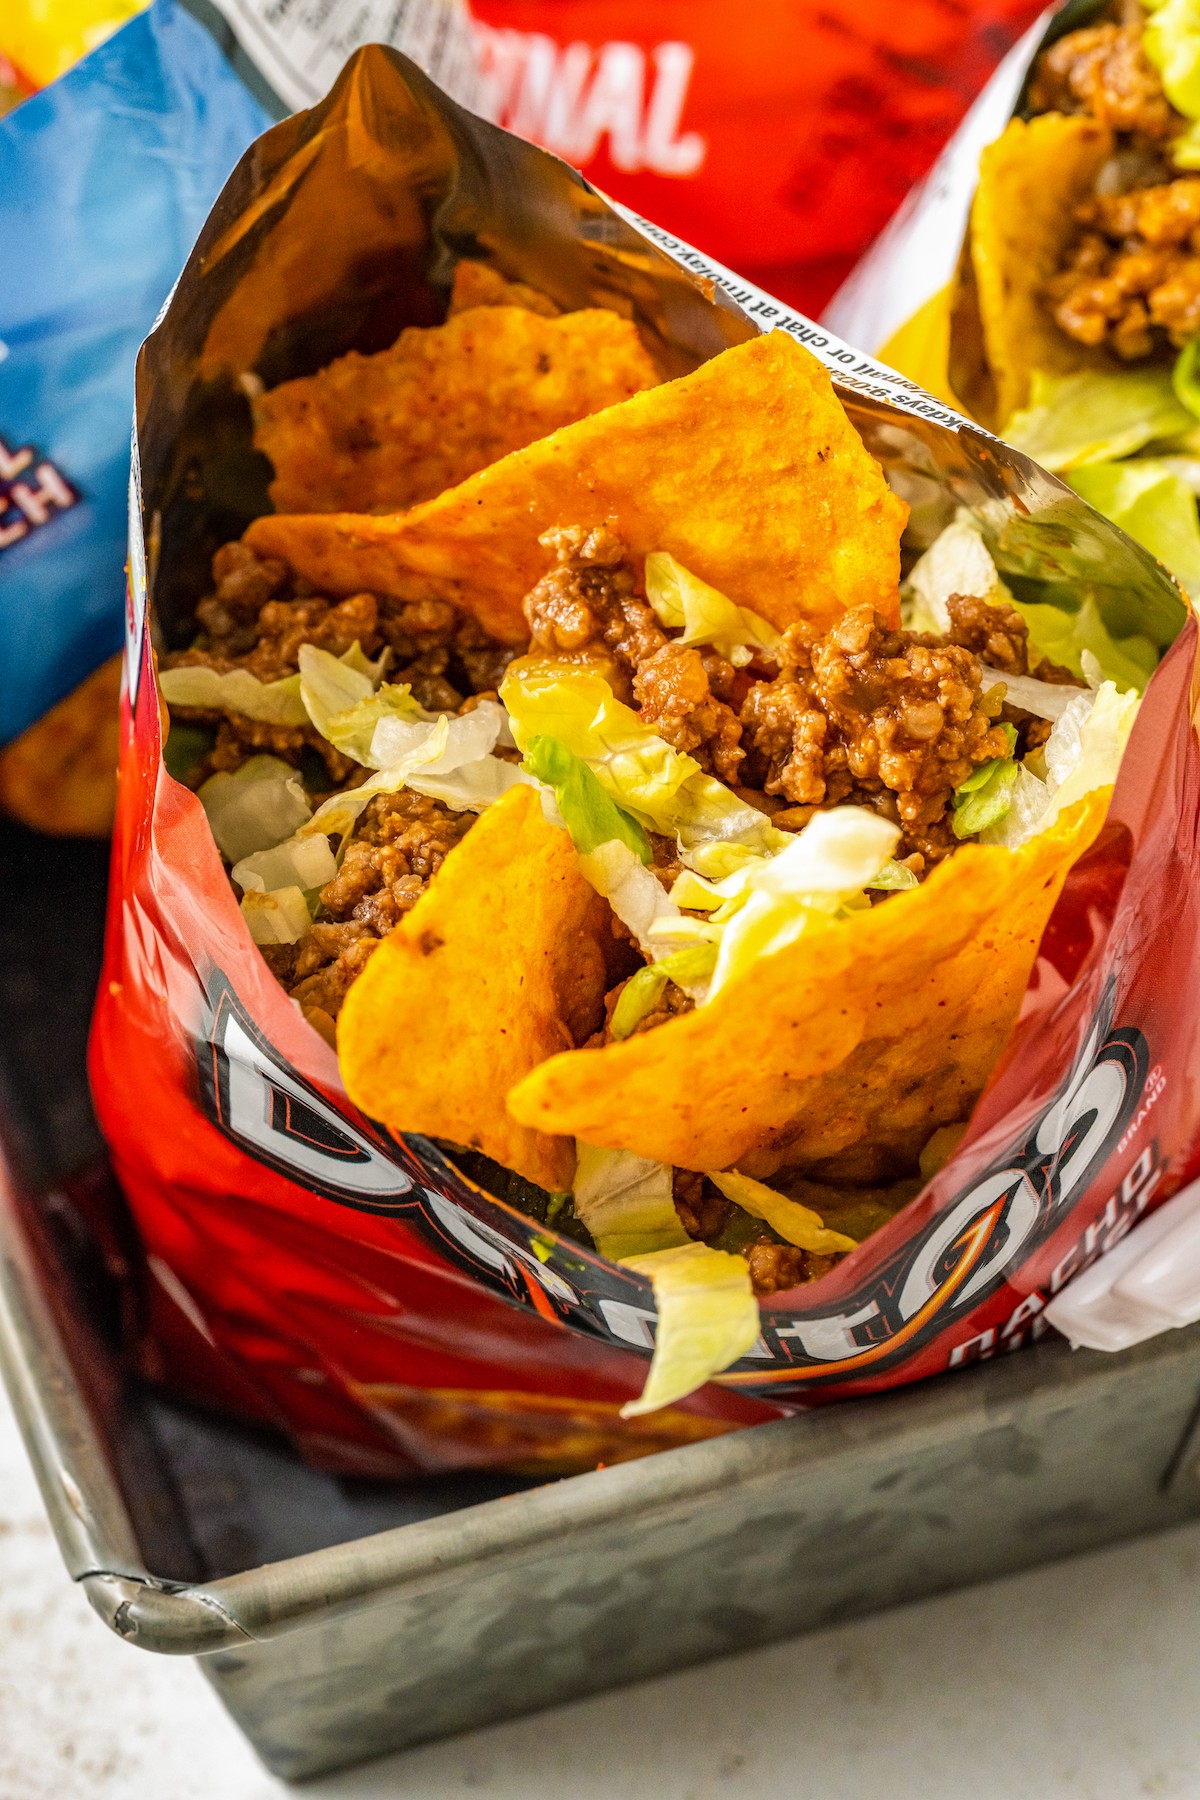 Overhead shot of a taco in a bag, made with doritos and toppings.